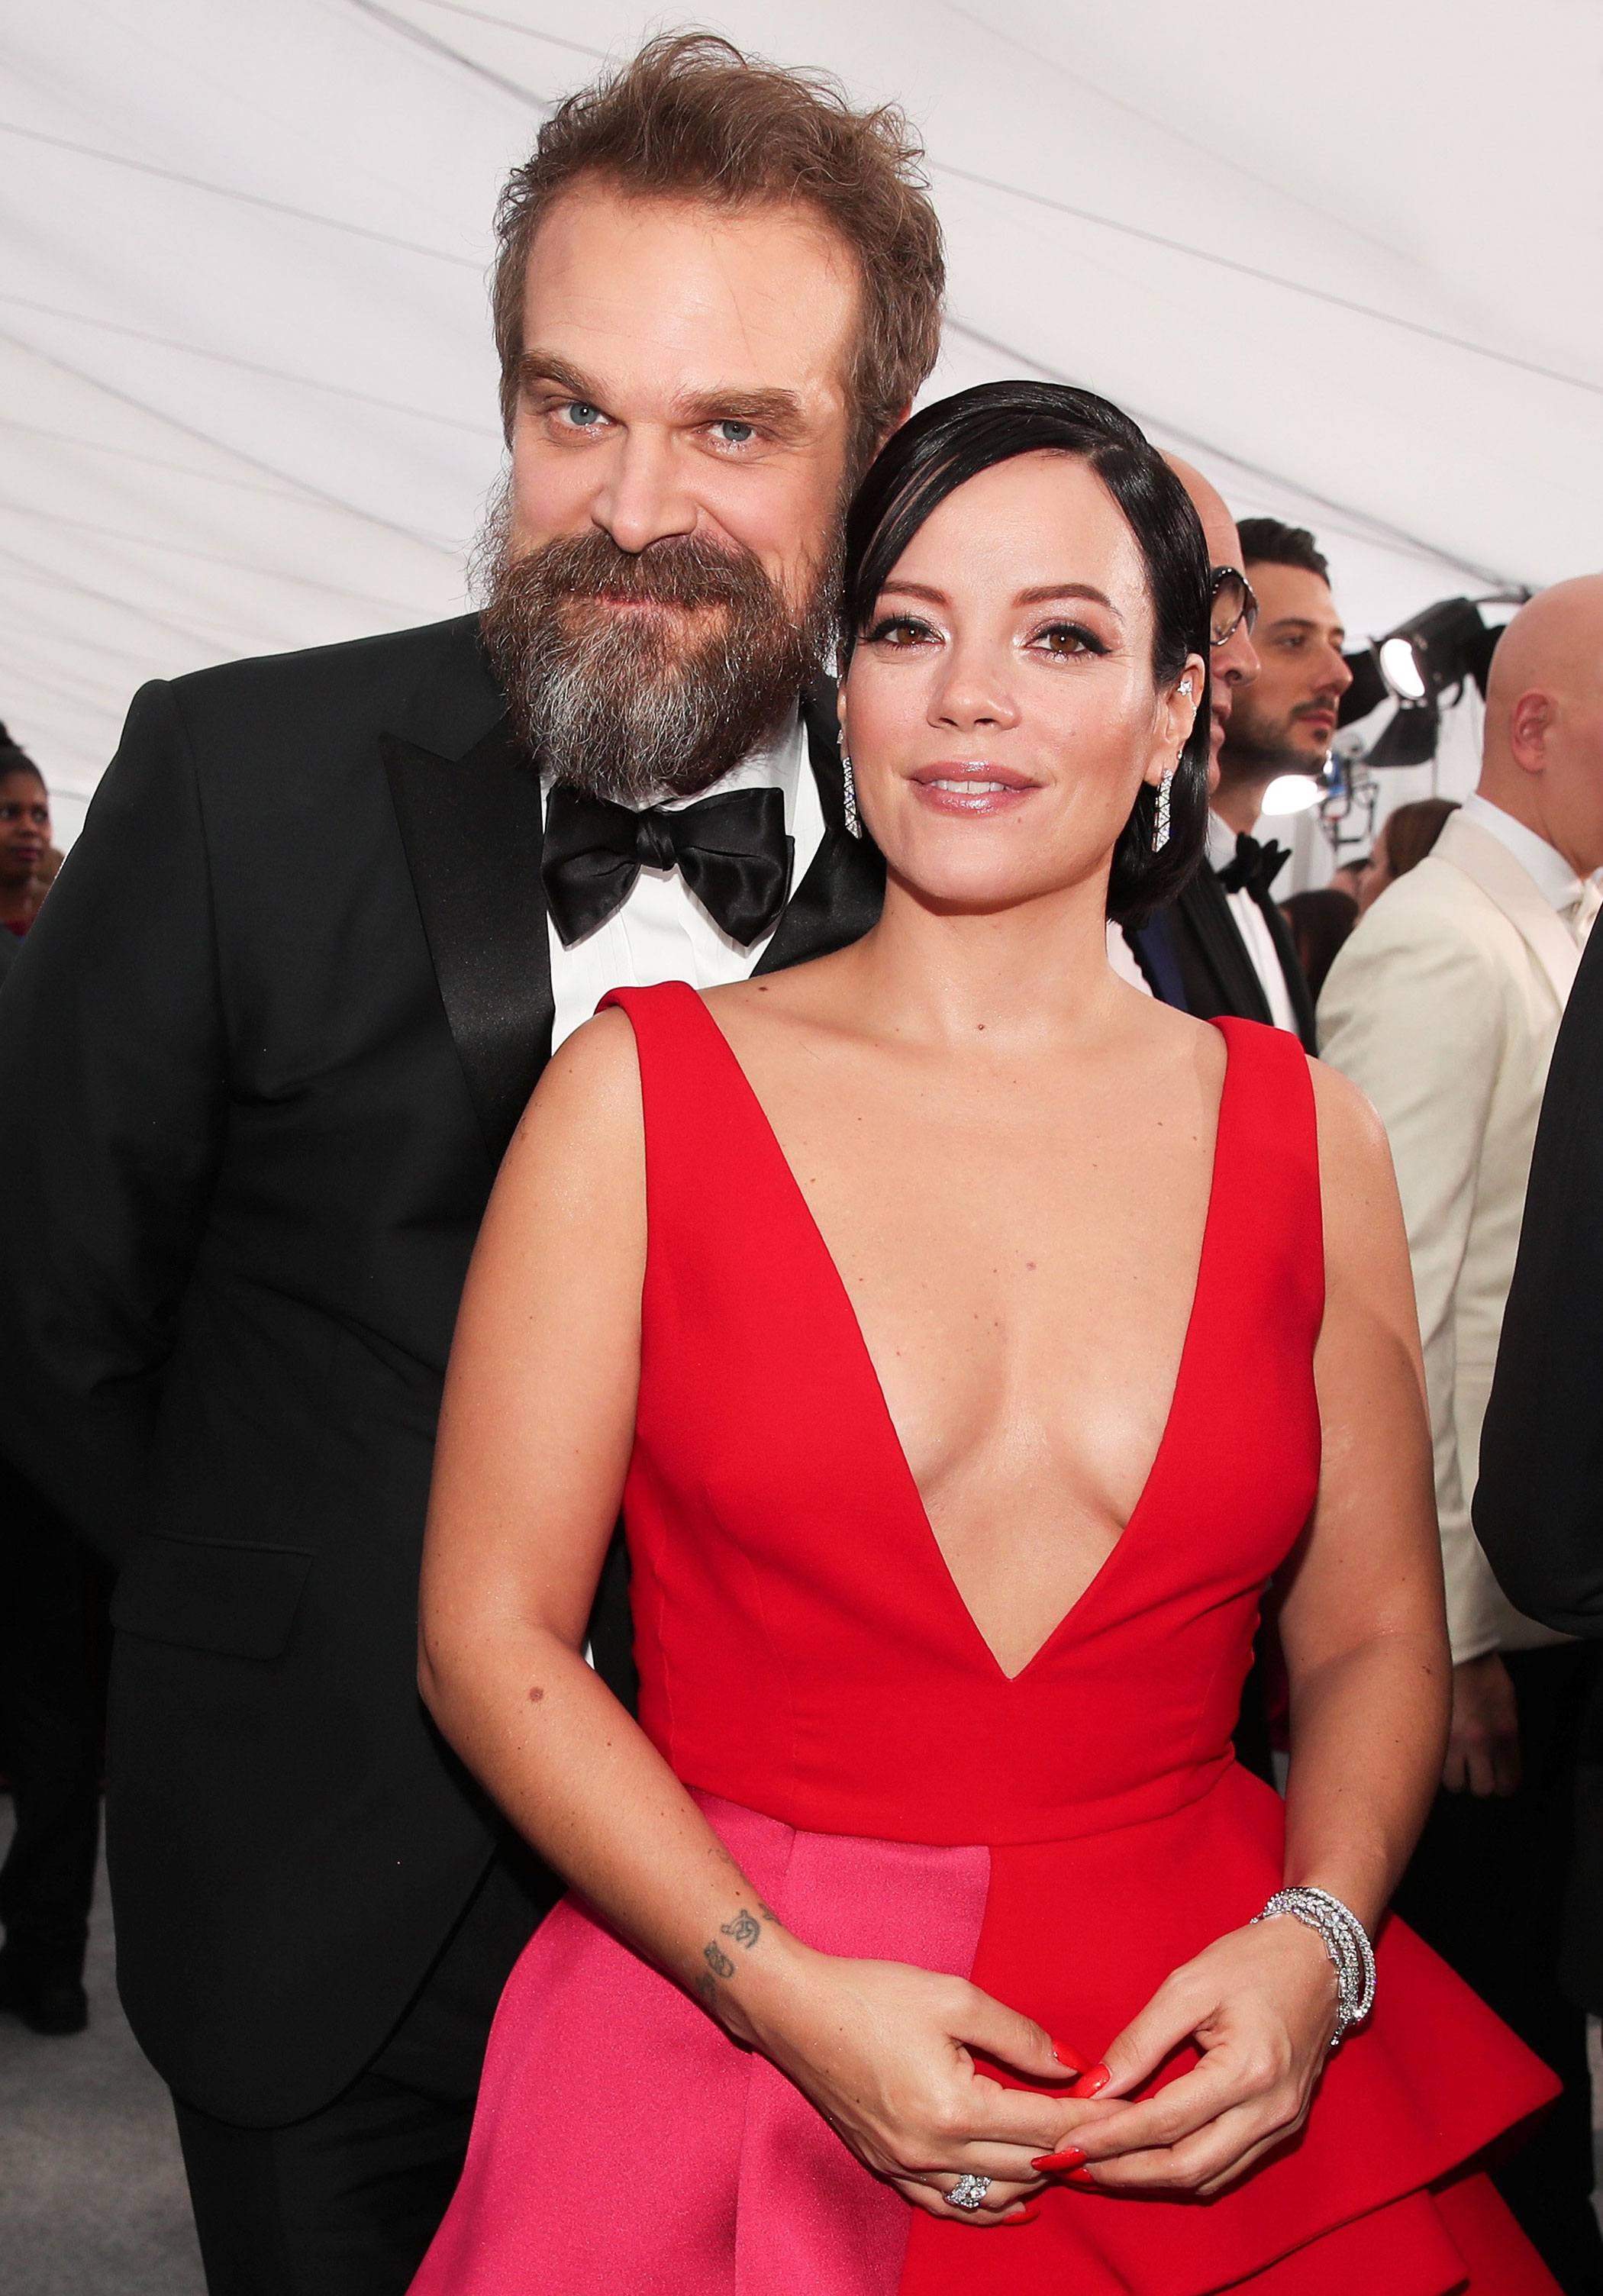 Lily Allen Wants Kids With David Harbour 1 Month After Wedding